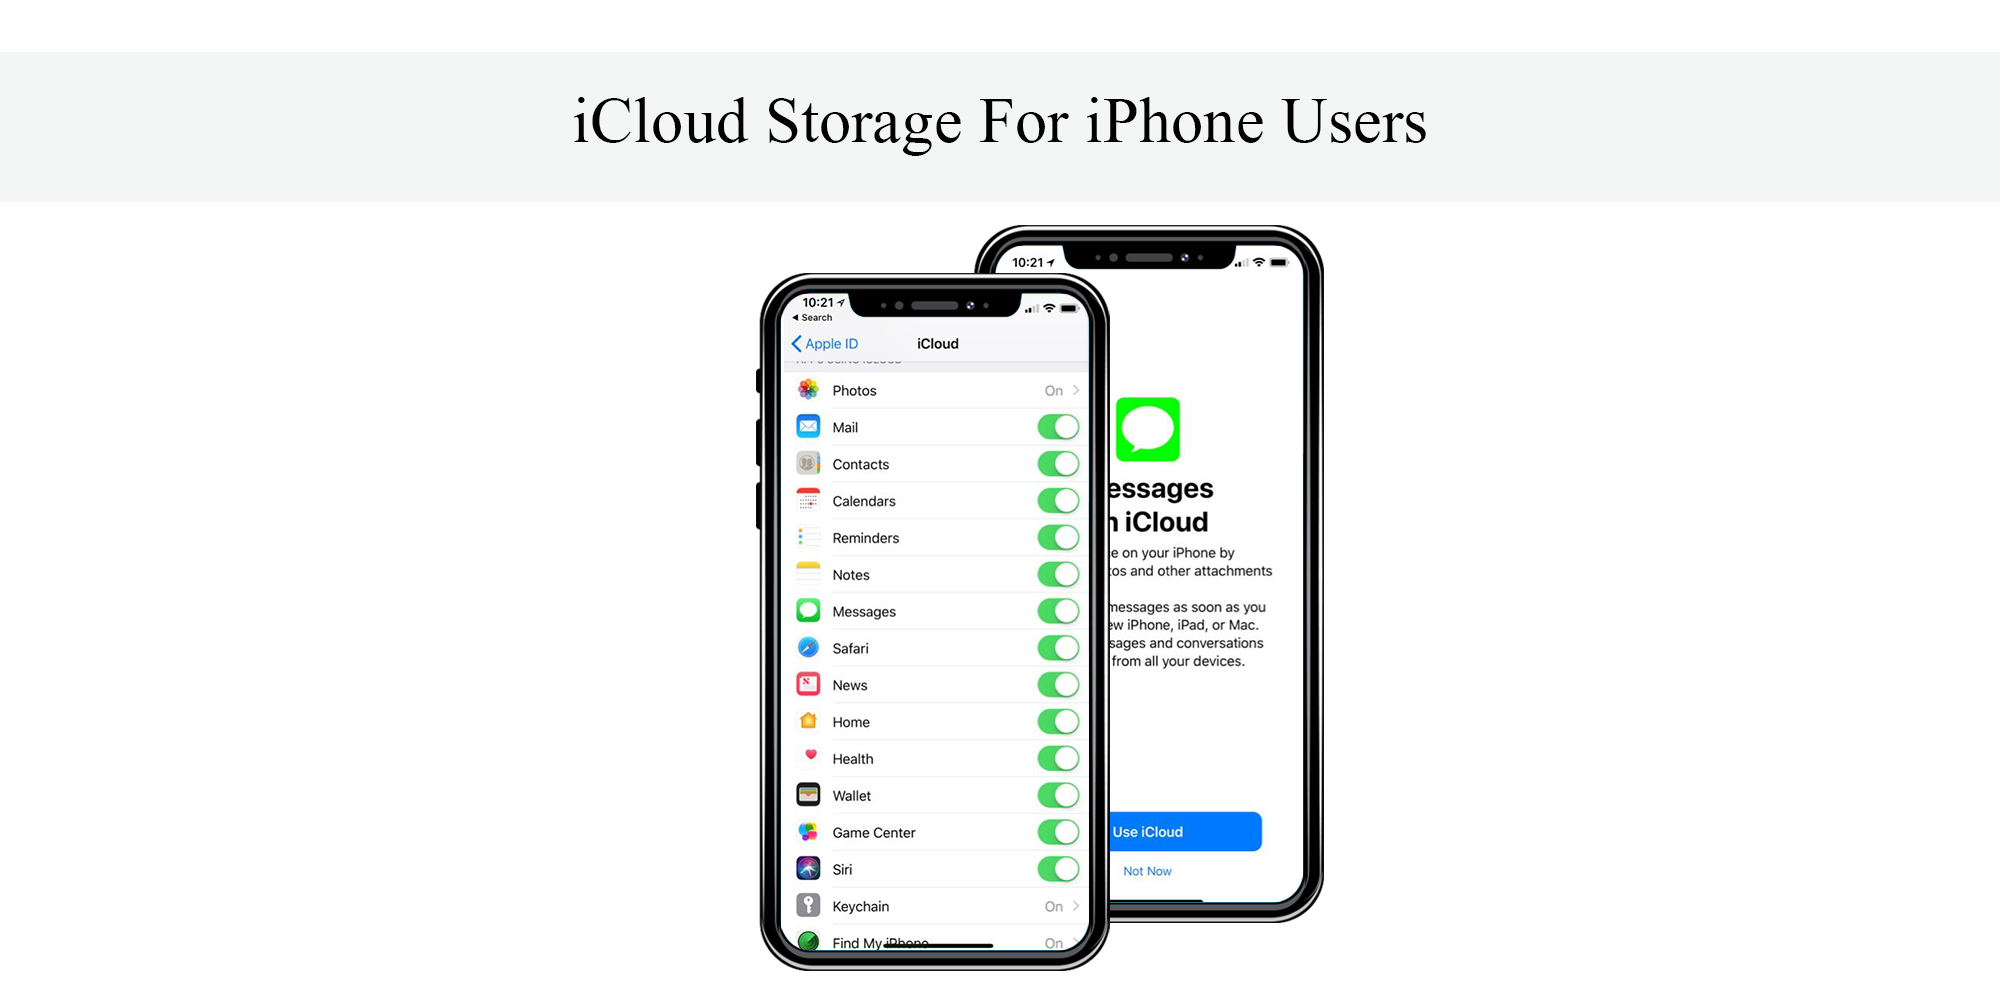 iCloud Storage For iPhone Users